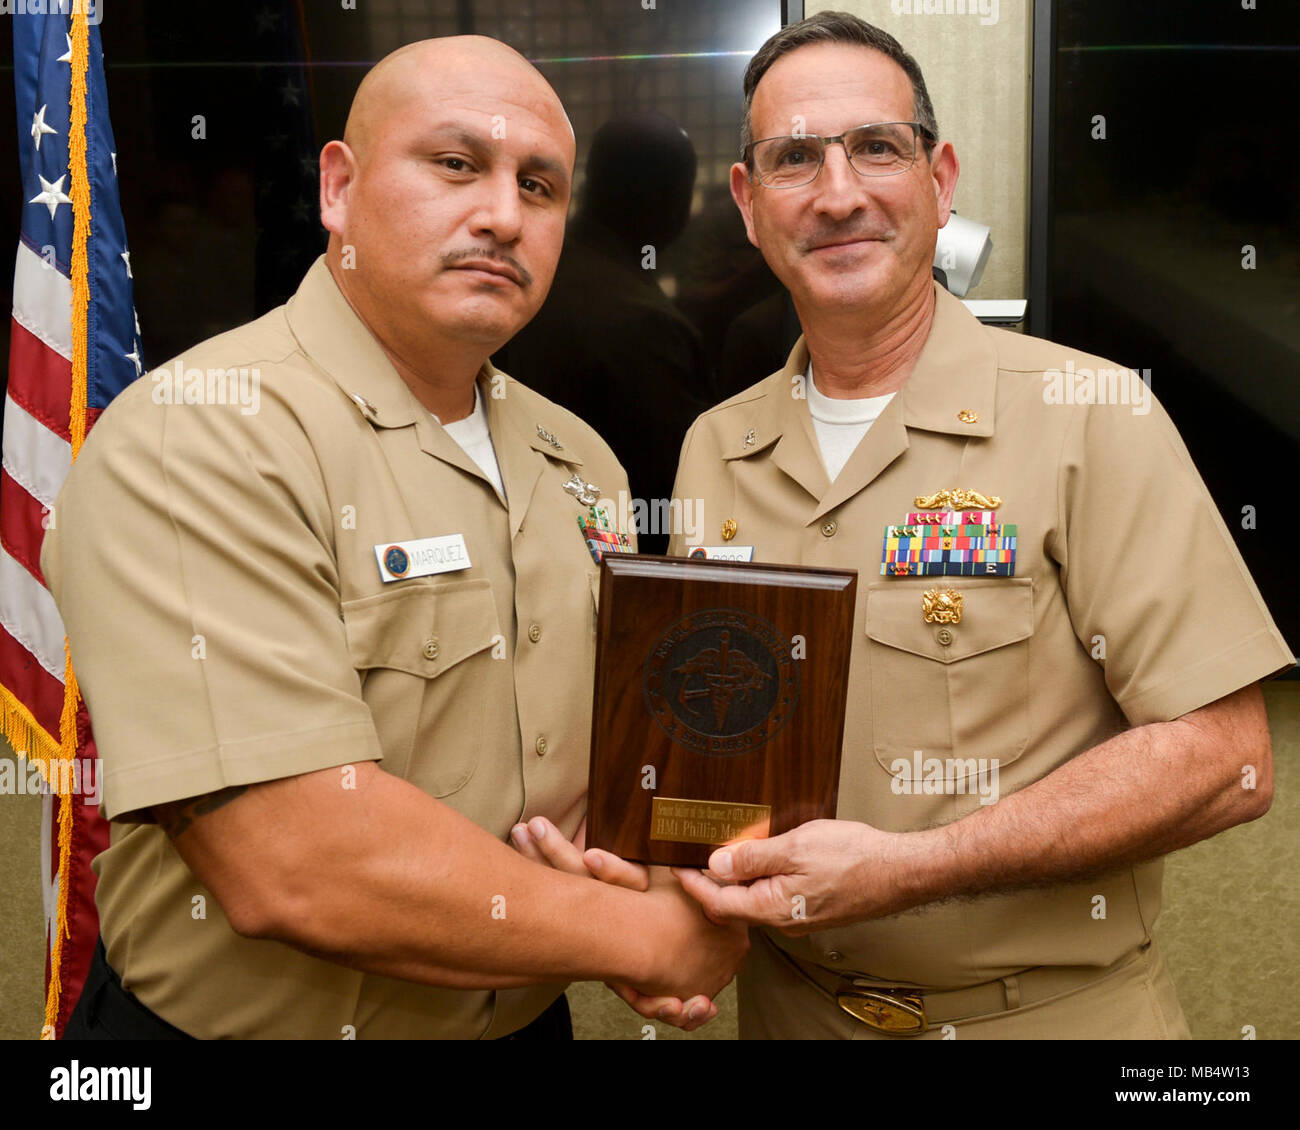 SAN DIEGO (Feb. 16, 2018) CAPT. Joel Roos, Naval Medical Center San Diego Commanding Officer,  presents Hospital Corpsman 1st Class Phillip Marquez with the Senior Sailor of the Quarter award. Hospital Corpsman 1st Class Marquez received the award for his exceptional work and devotion to duty. Stock Photo